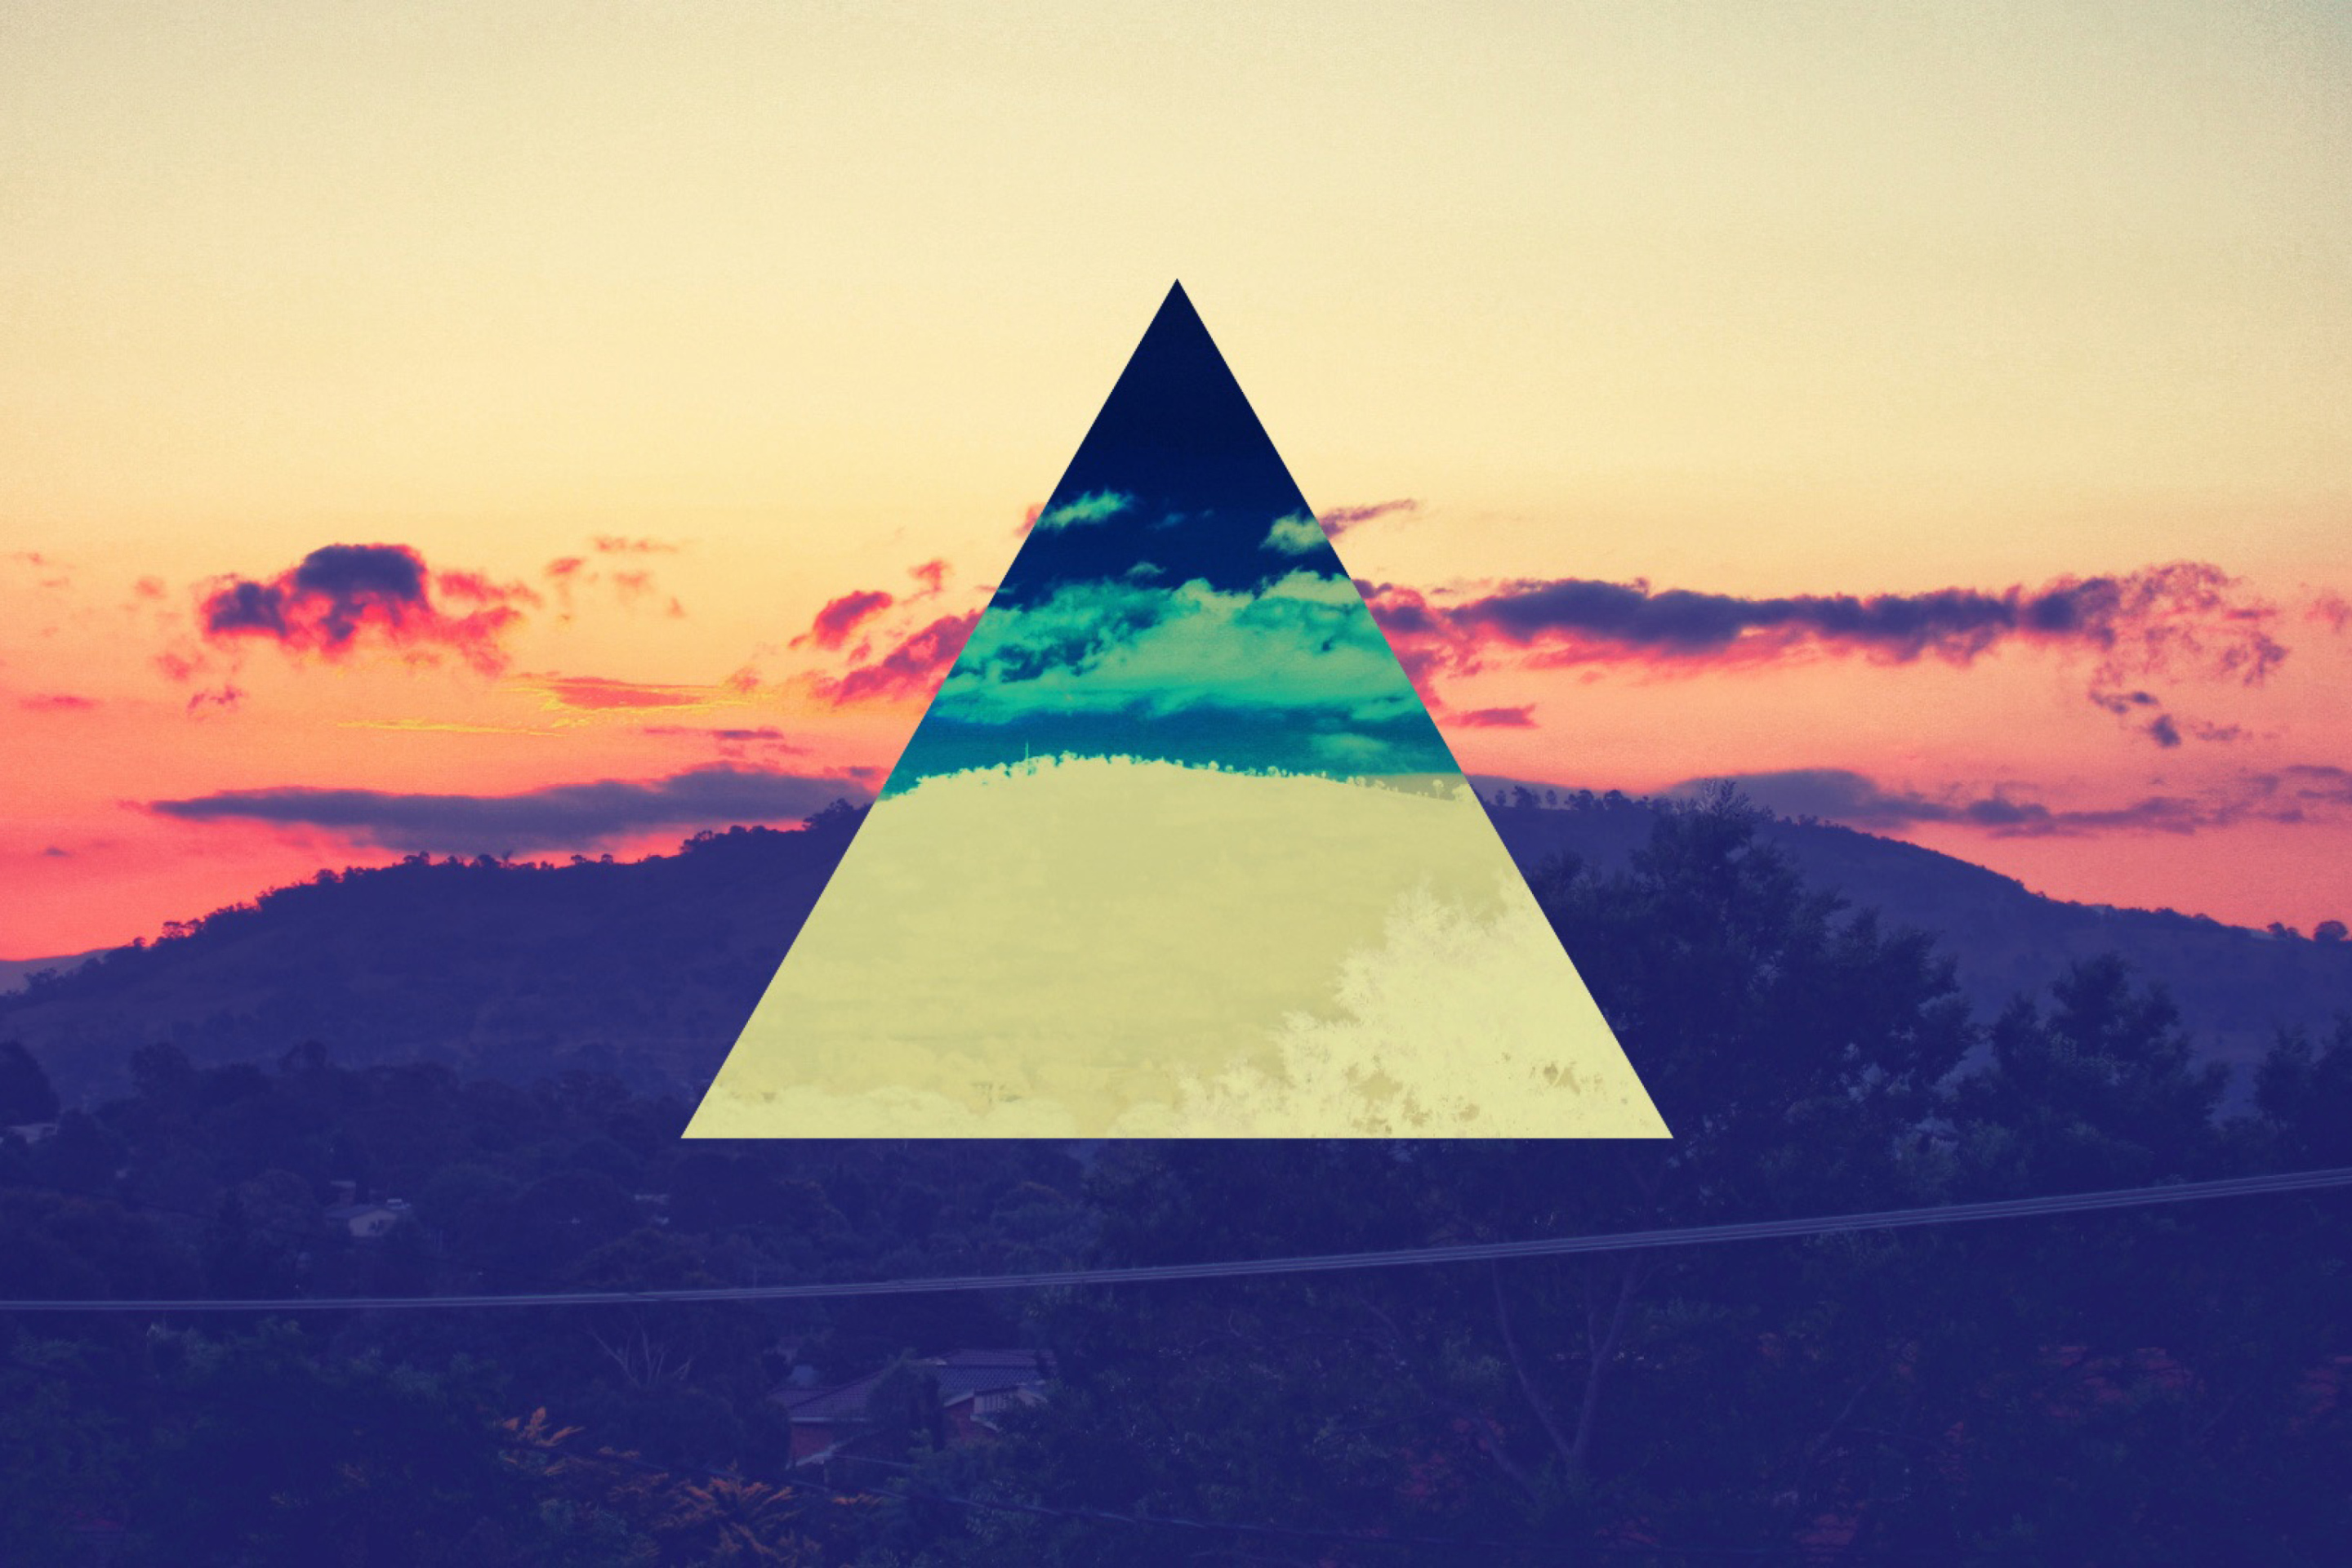 Das Sunset Inverted Colour Triangle Wallpaper 2880x1920